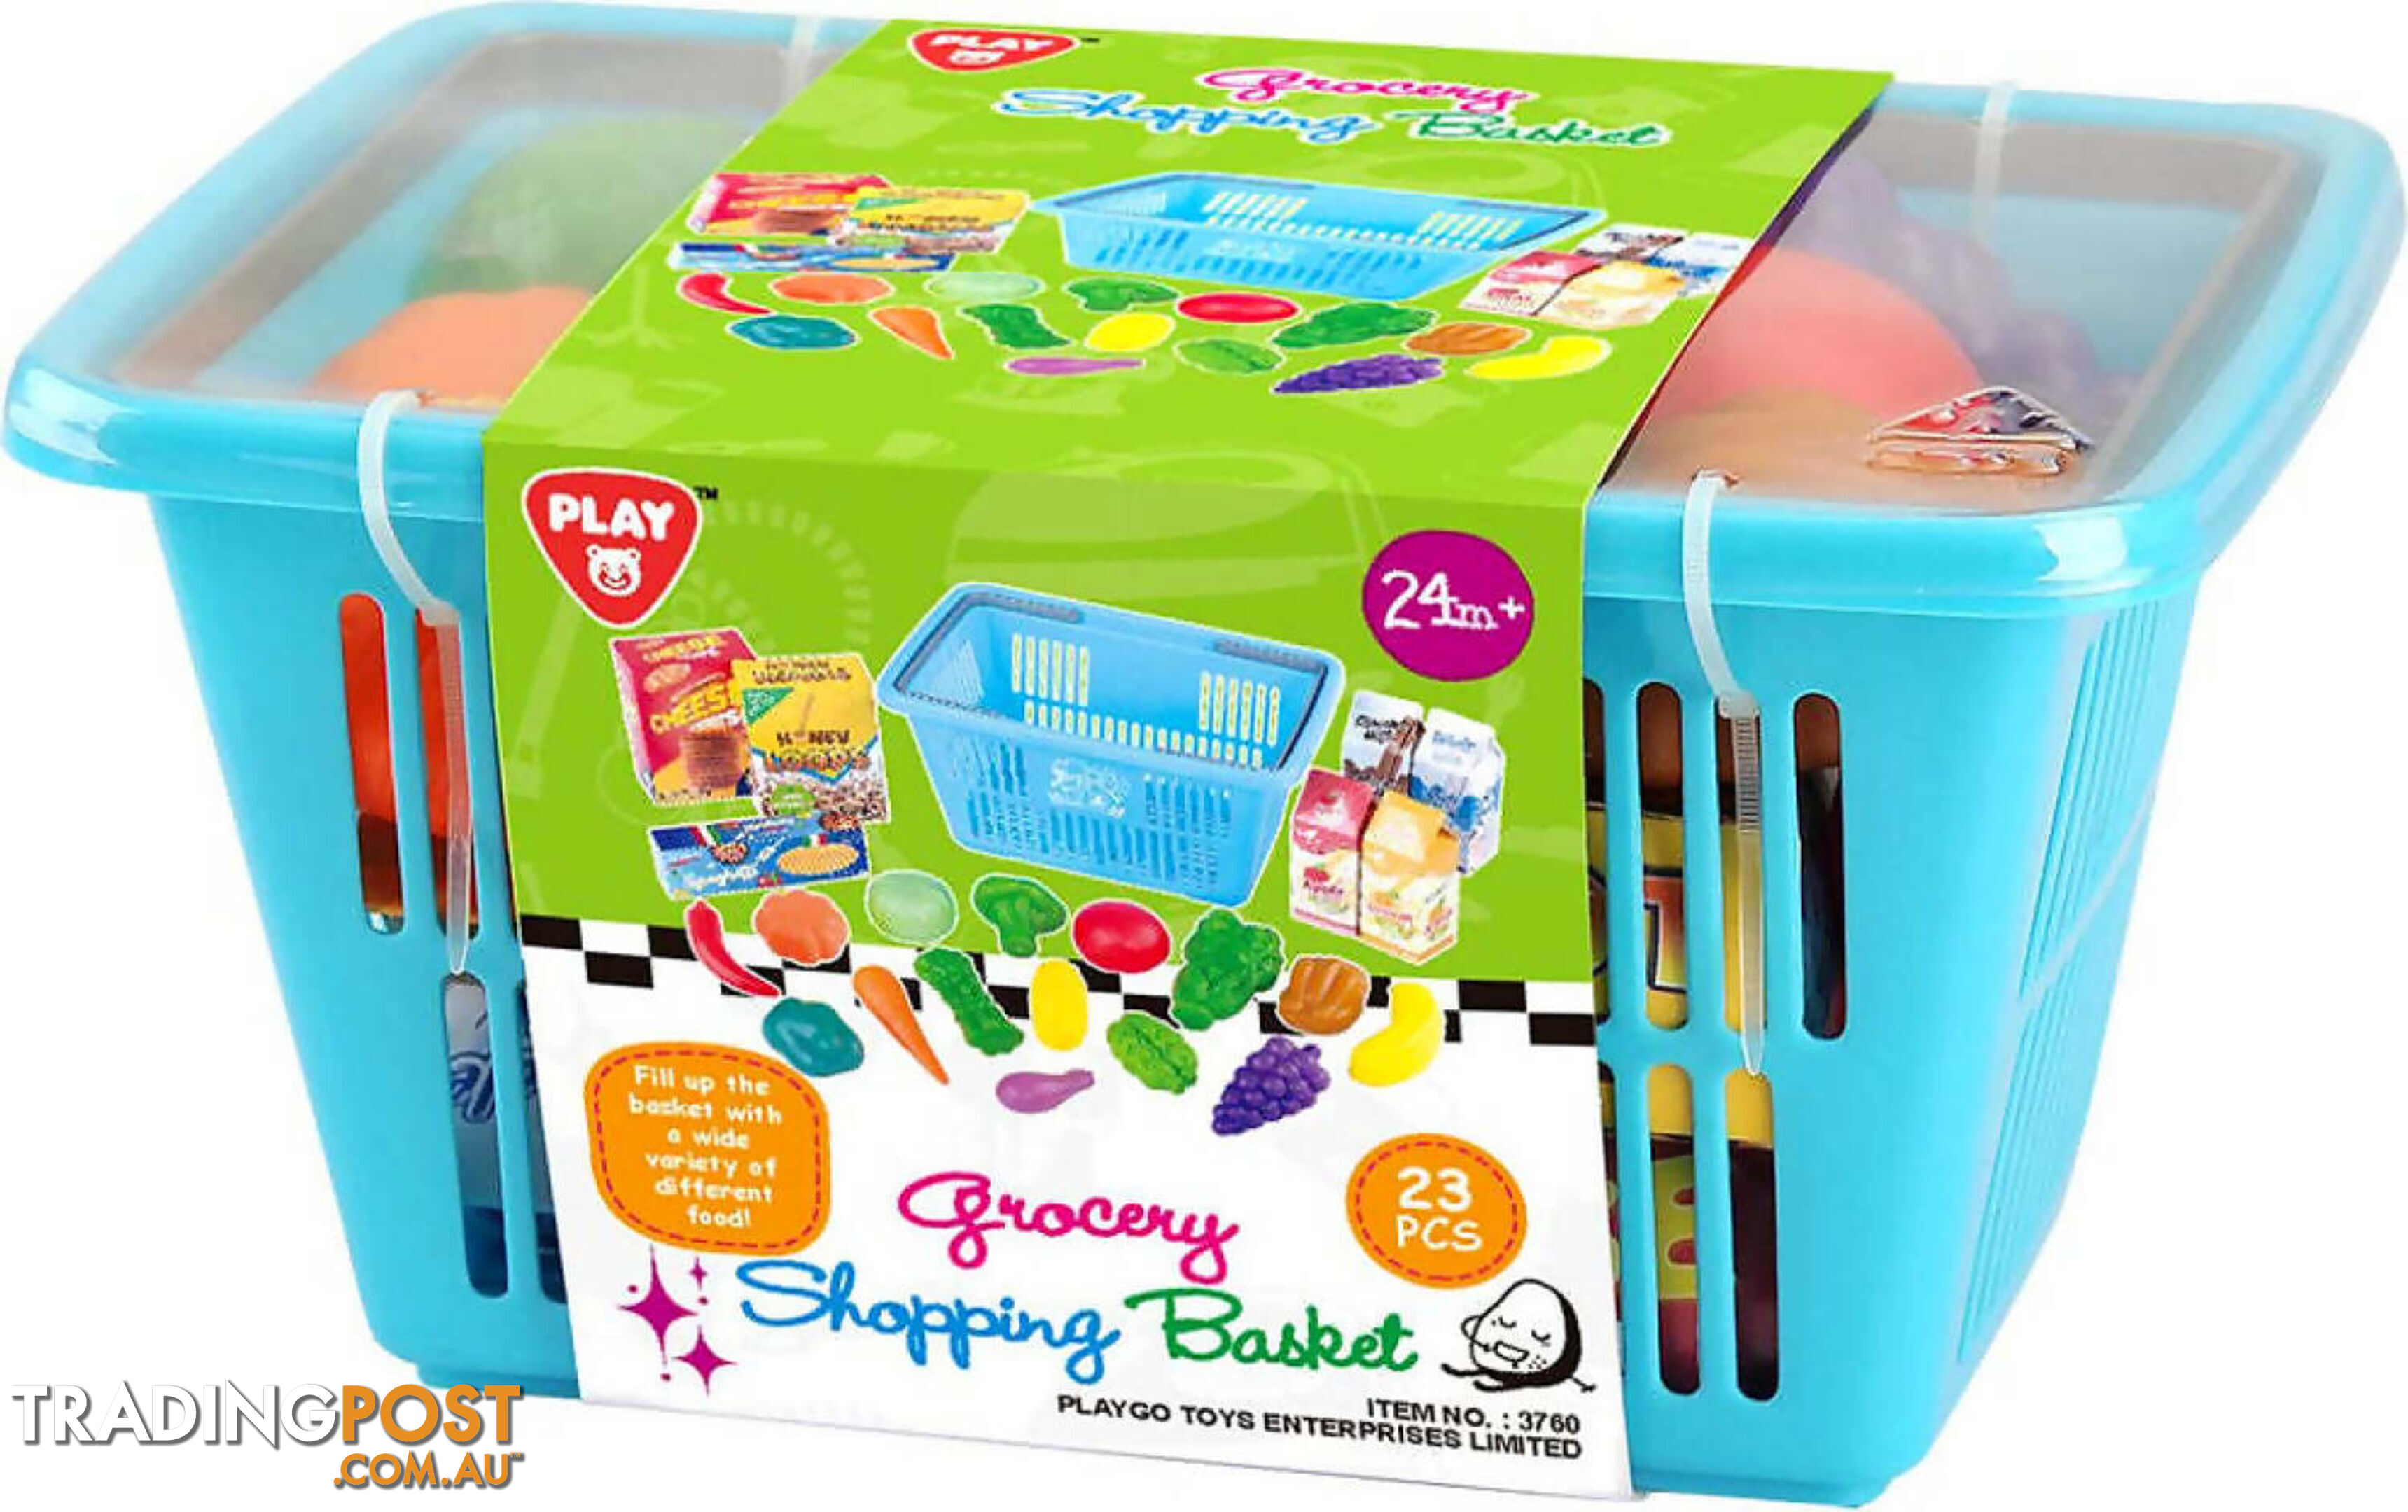 Playgo Toys Ent. Ltd. - Grocery Shopping Basket 23 Pieces - Art66174 - 4892401037602